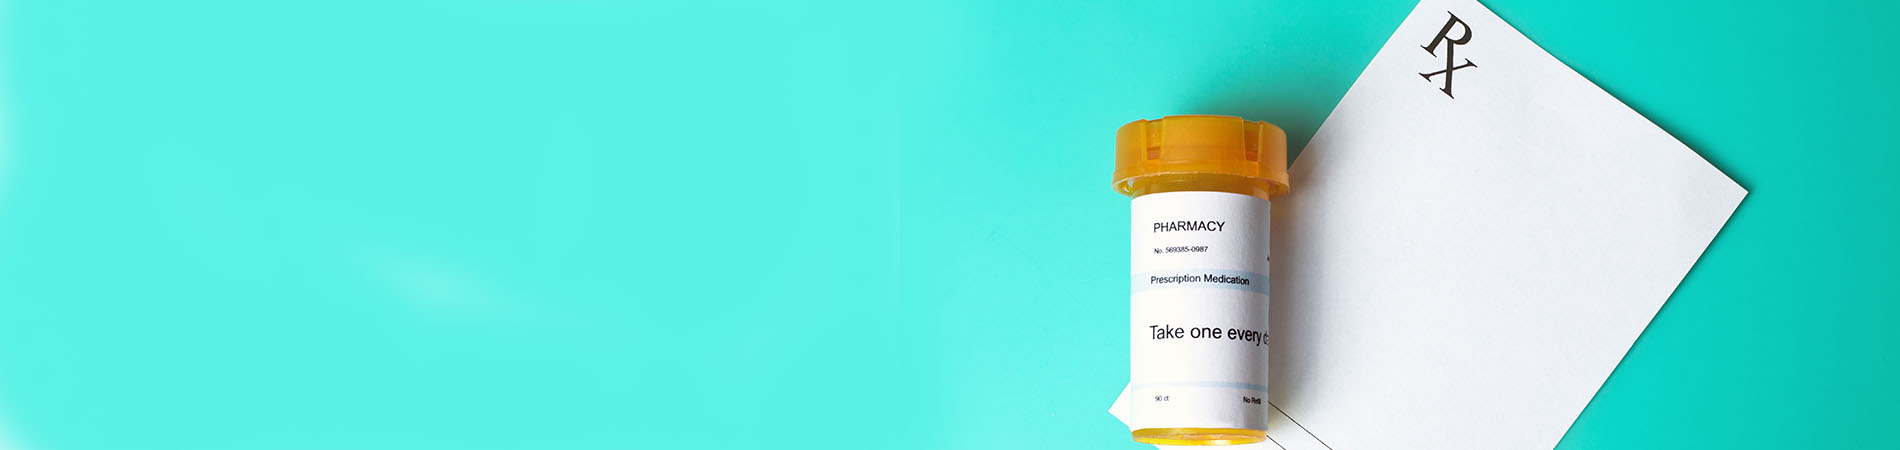 medicine bottle on a prescription pad that typically includes a DEA number for the provider